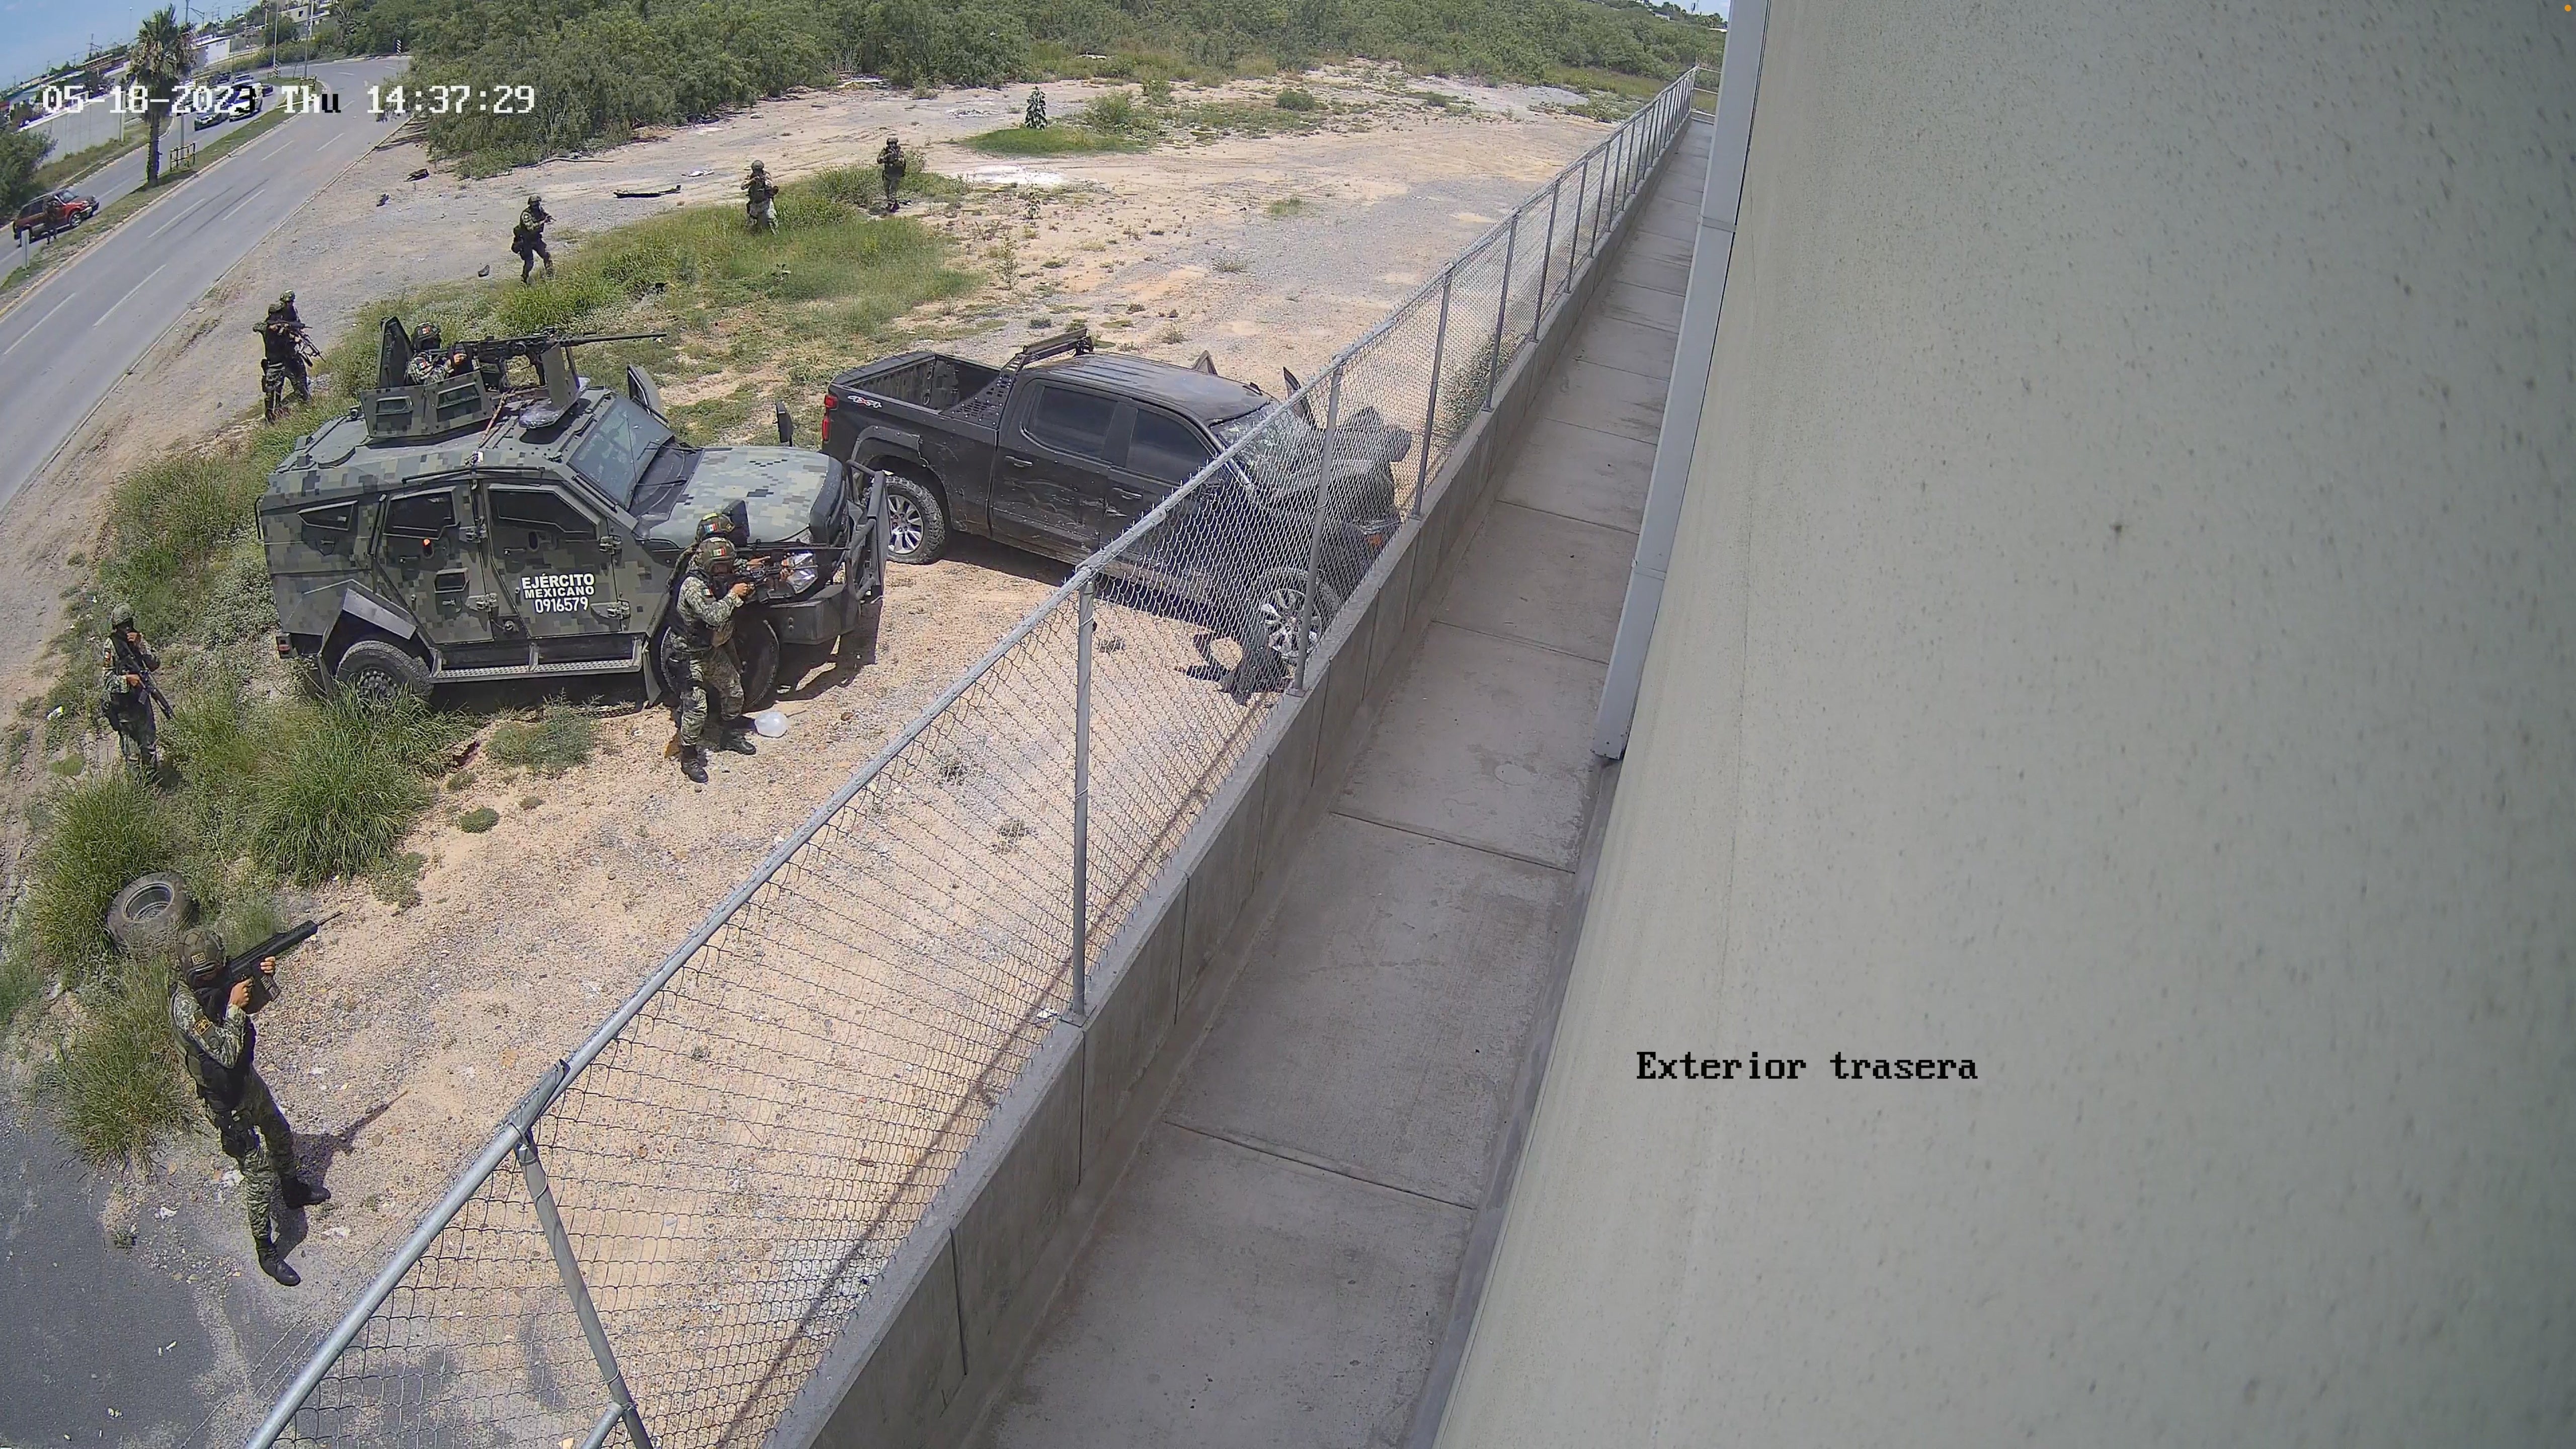 Soldiers with weapons approach a pick-up truck after it crashed into a wall at high speed in Nuevo Laredo